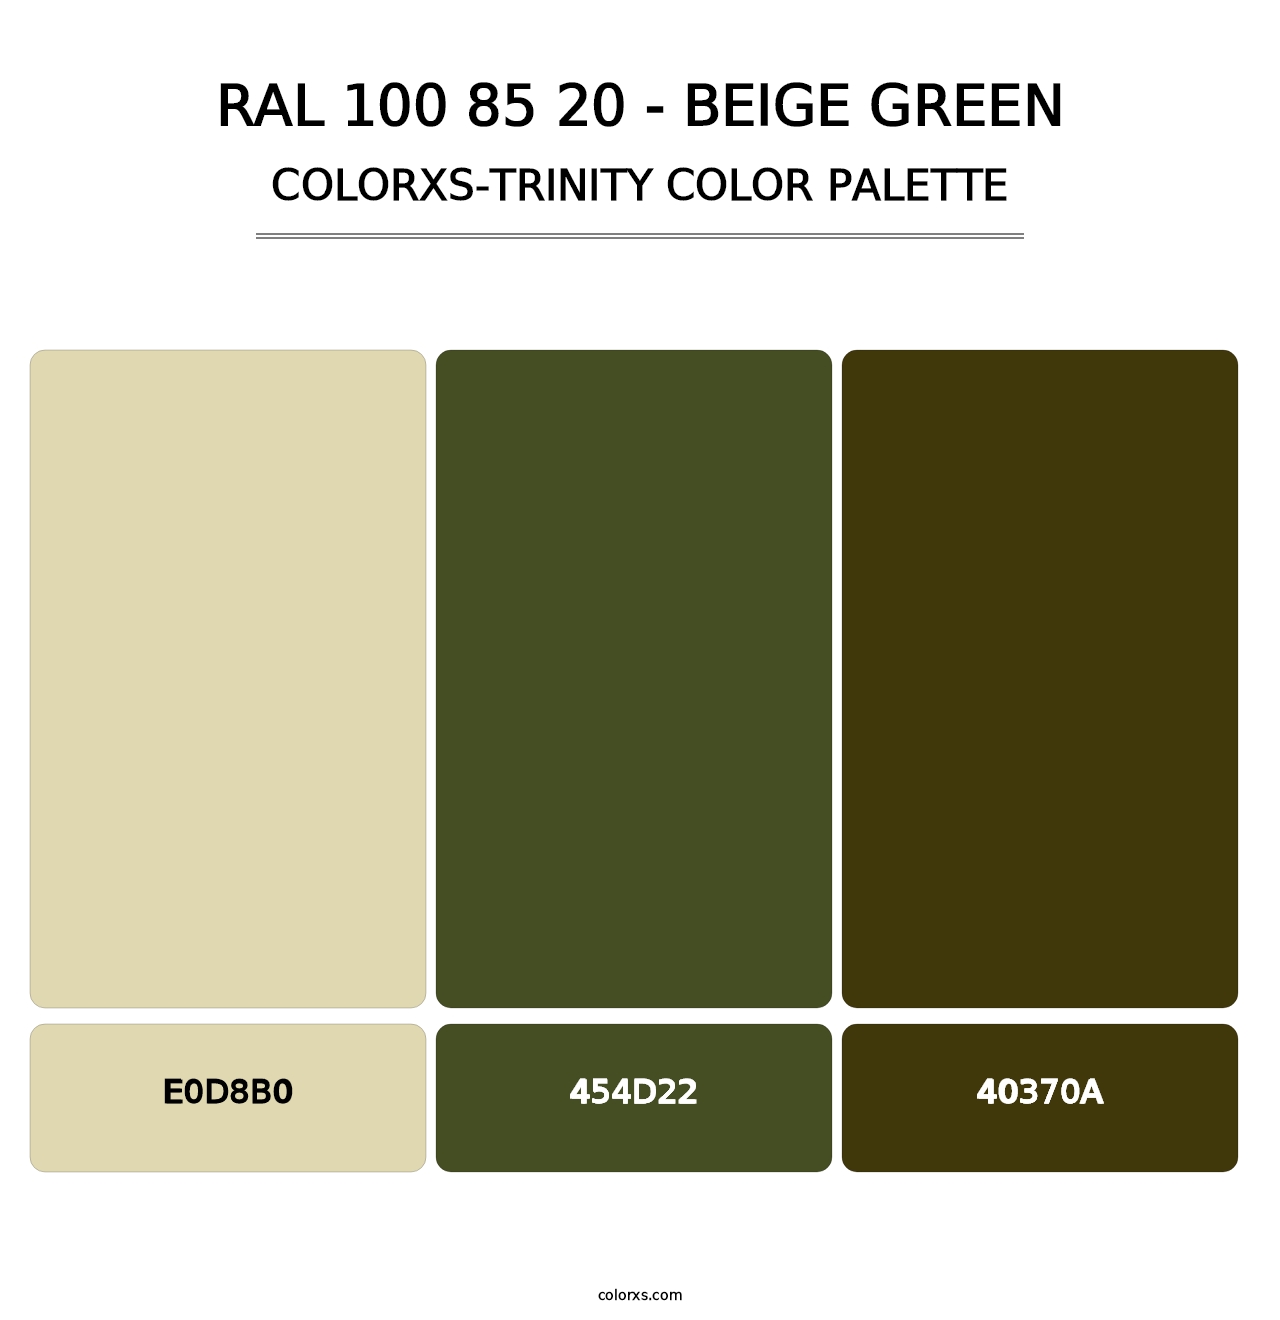 RAL 100 85 20 - Beige Green - Colorxs Trinity Palette